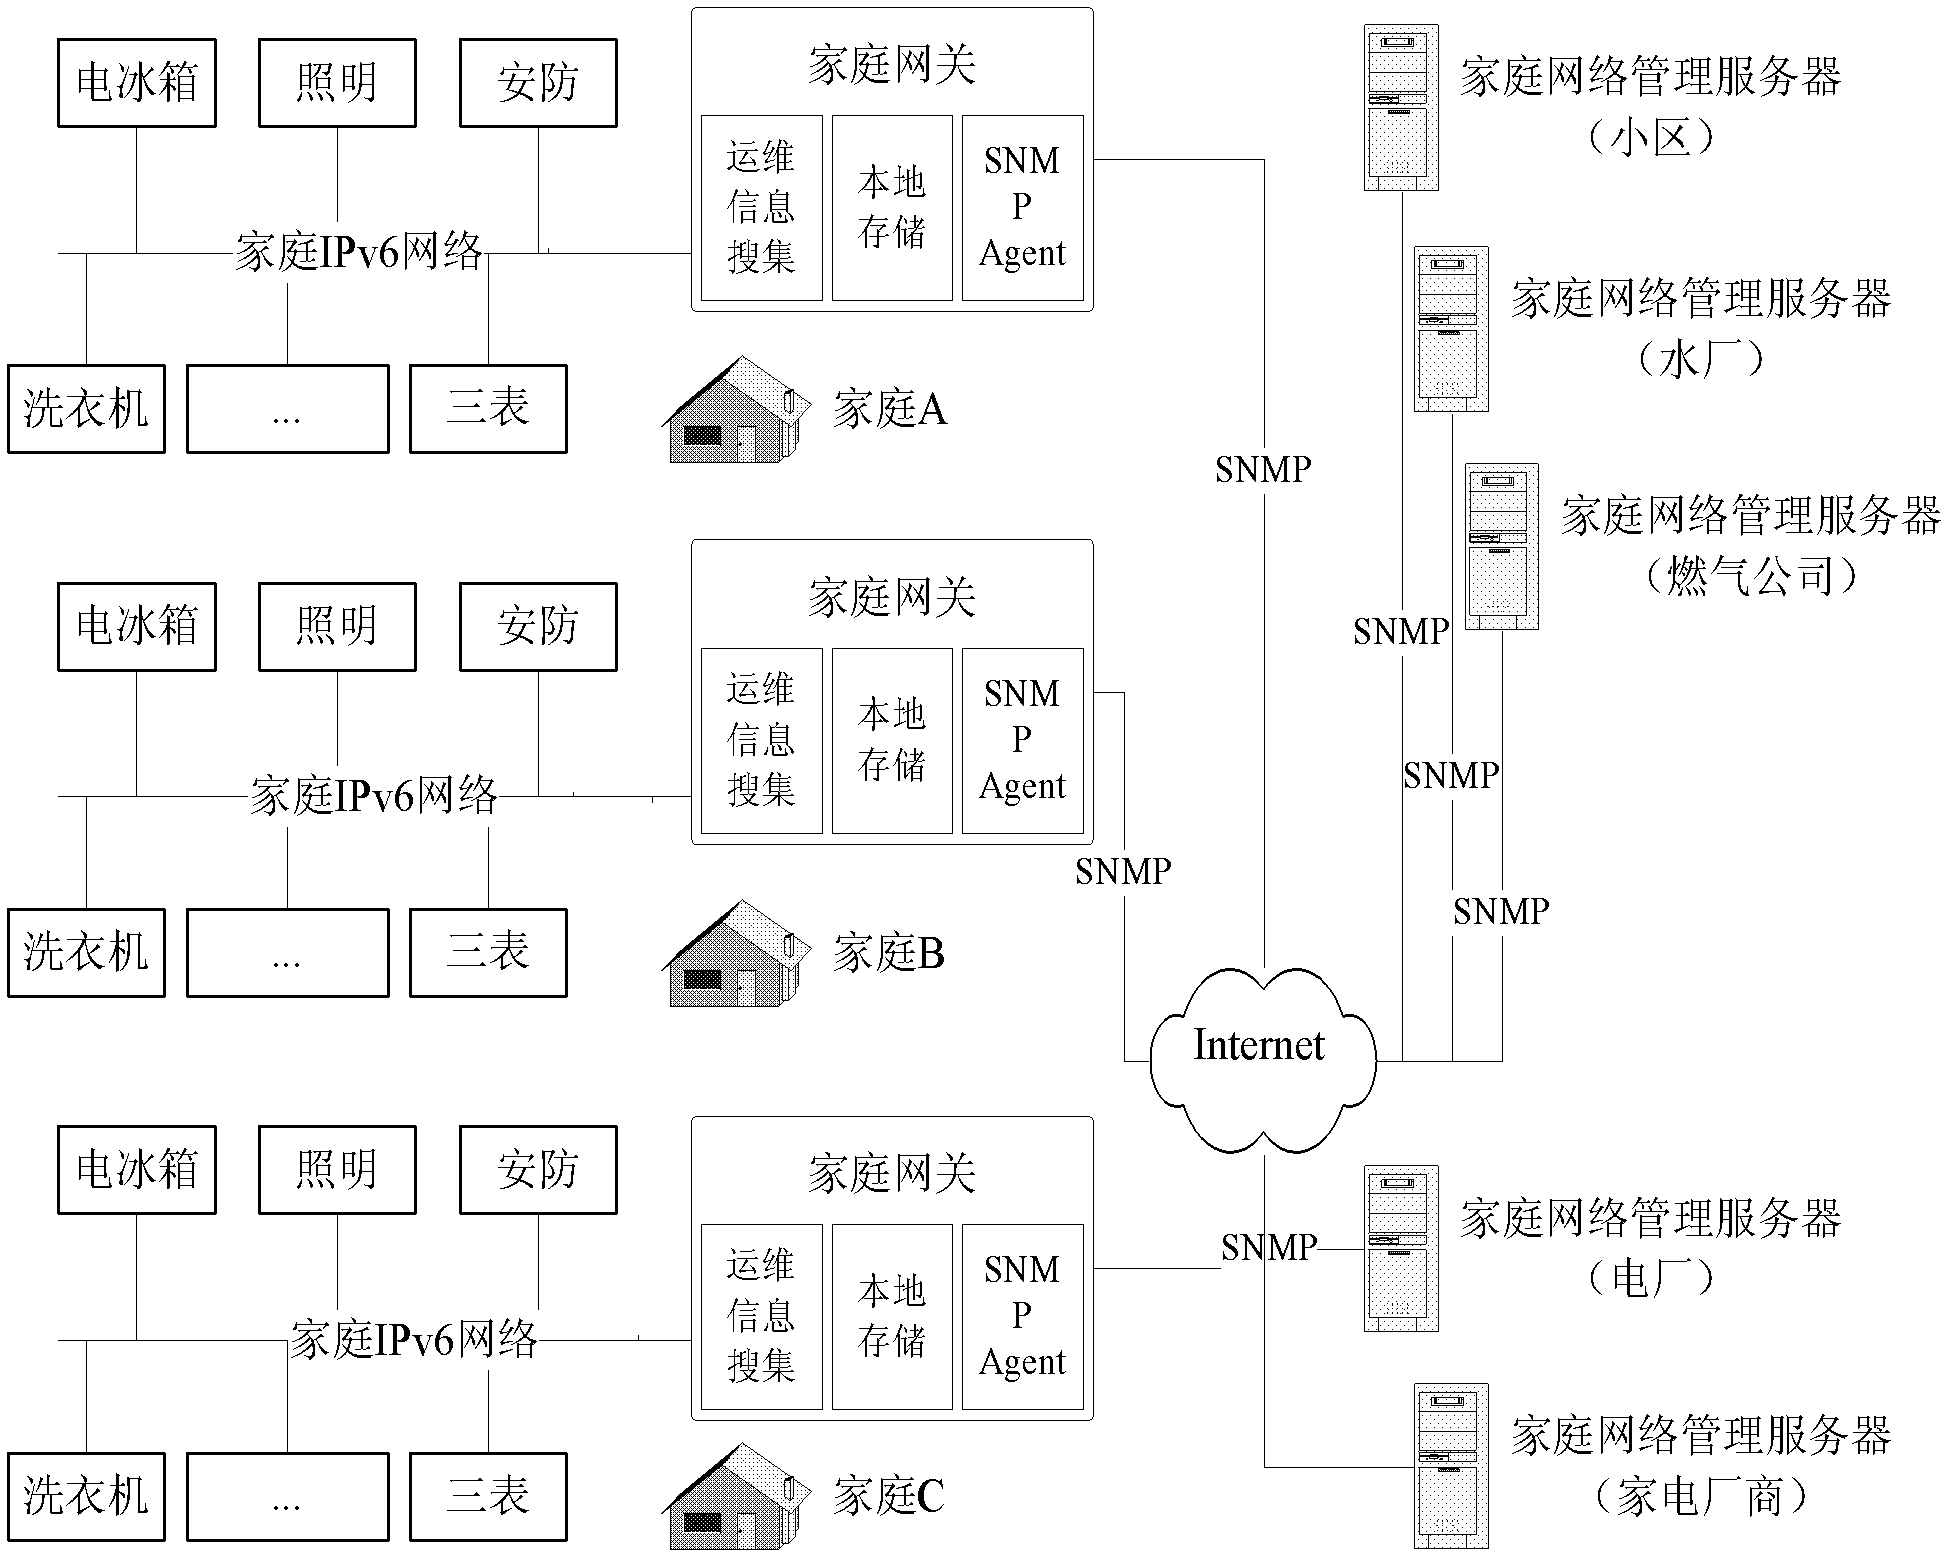 Method for realizing digital home network control technology